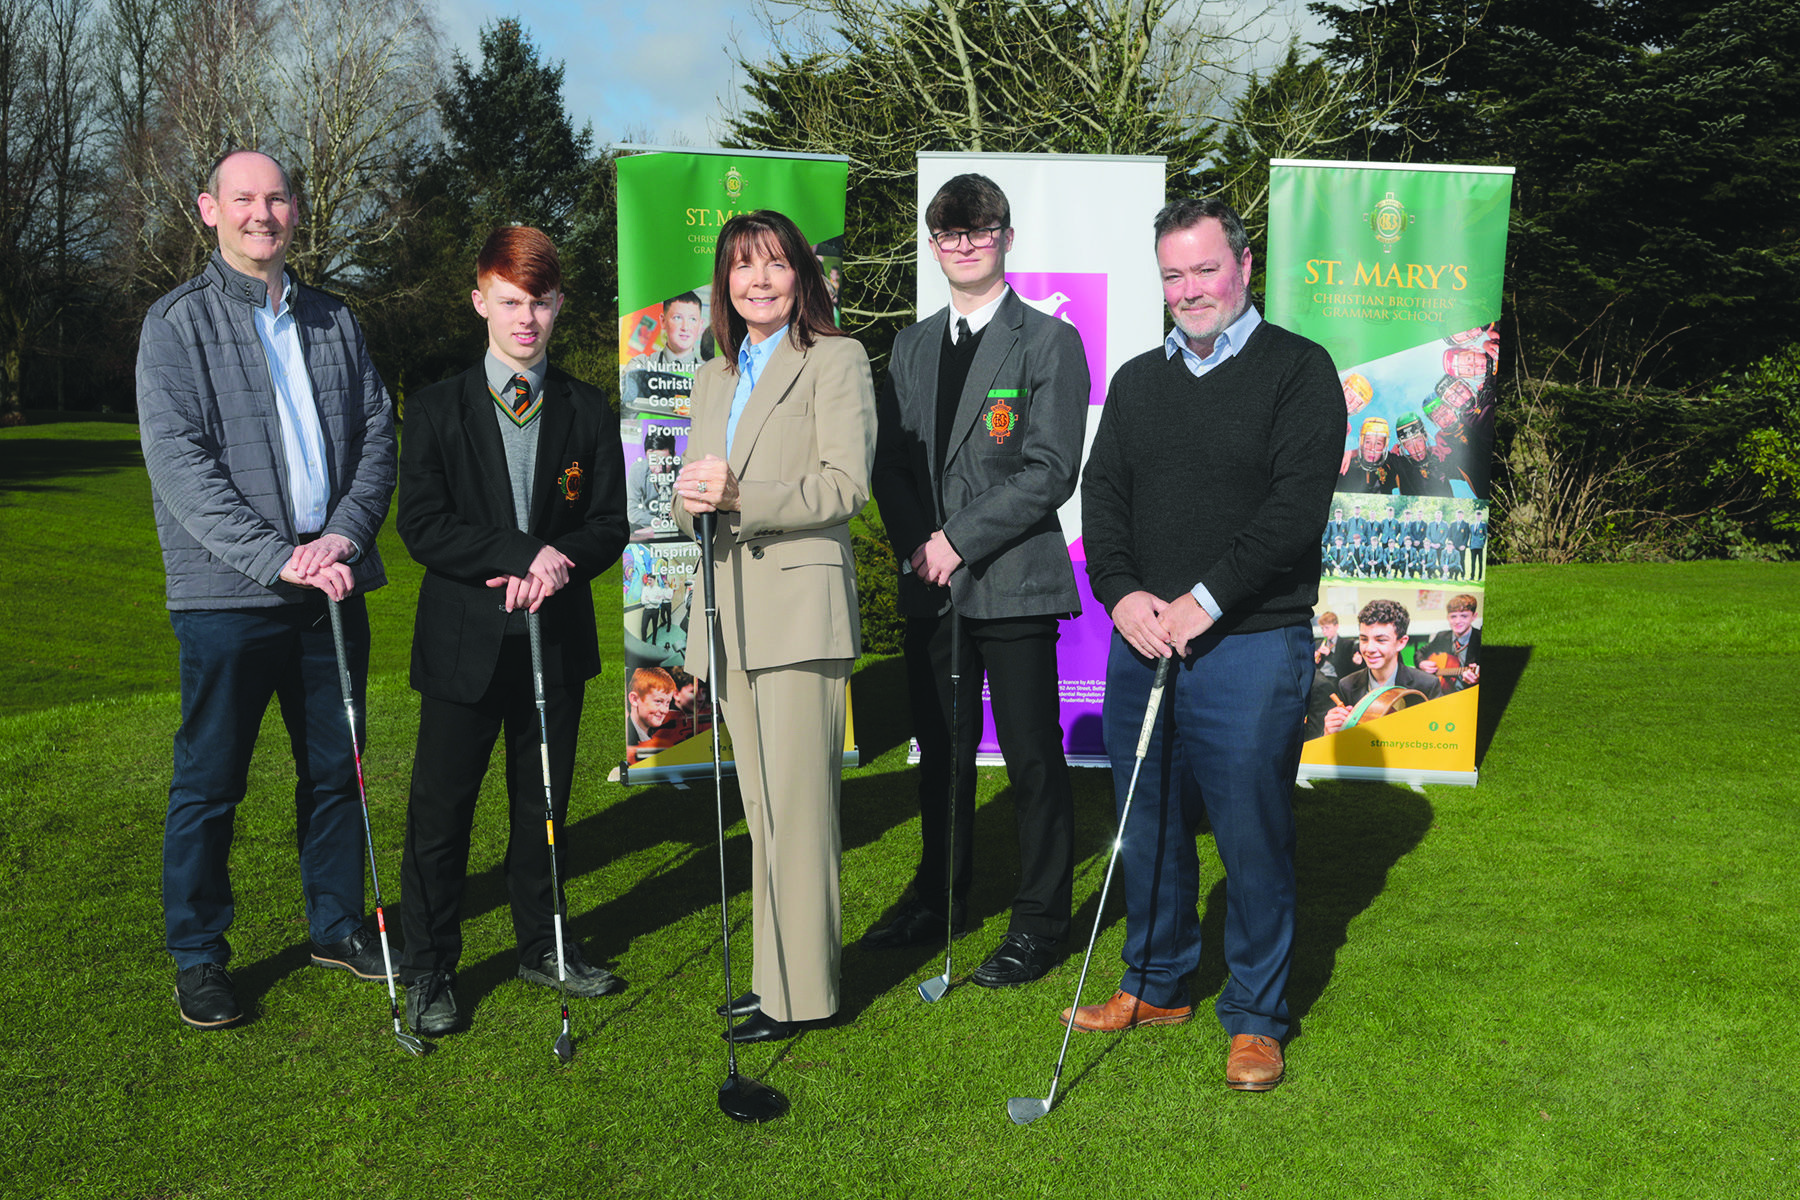 St Mary\'s CBGS Principal Siobhan Kelly with pupils Eoin Burrows and Fionn Dobbin were joined by AIB\'S Charlie McStravick and Paul Doyle for the launch of the St Mary\'s CBGS Golf Classic at Balmoral Golf Club, set to be held on Friday, May 10